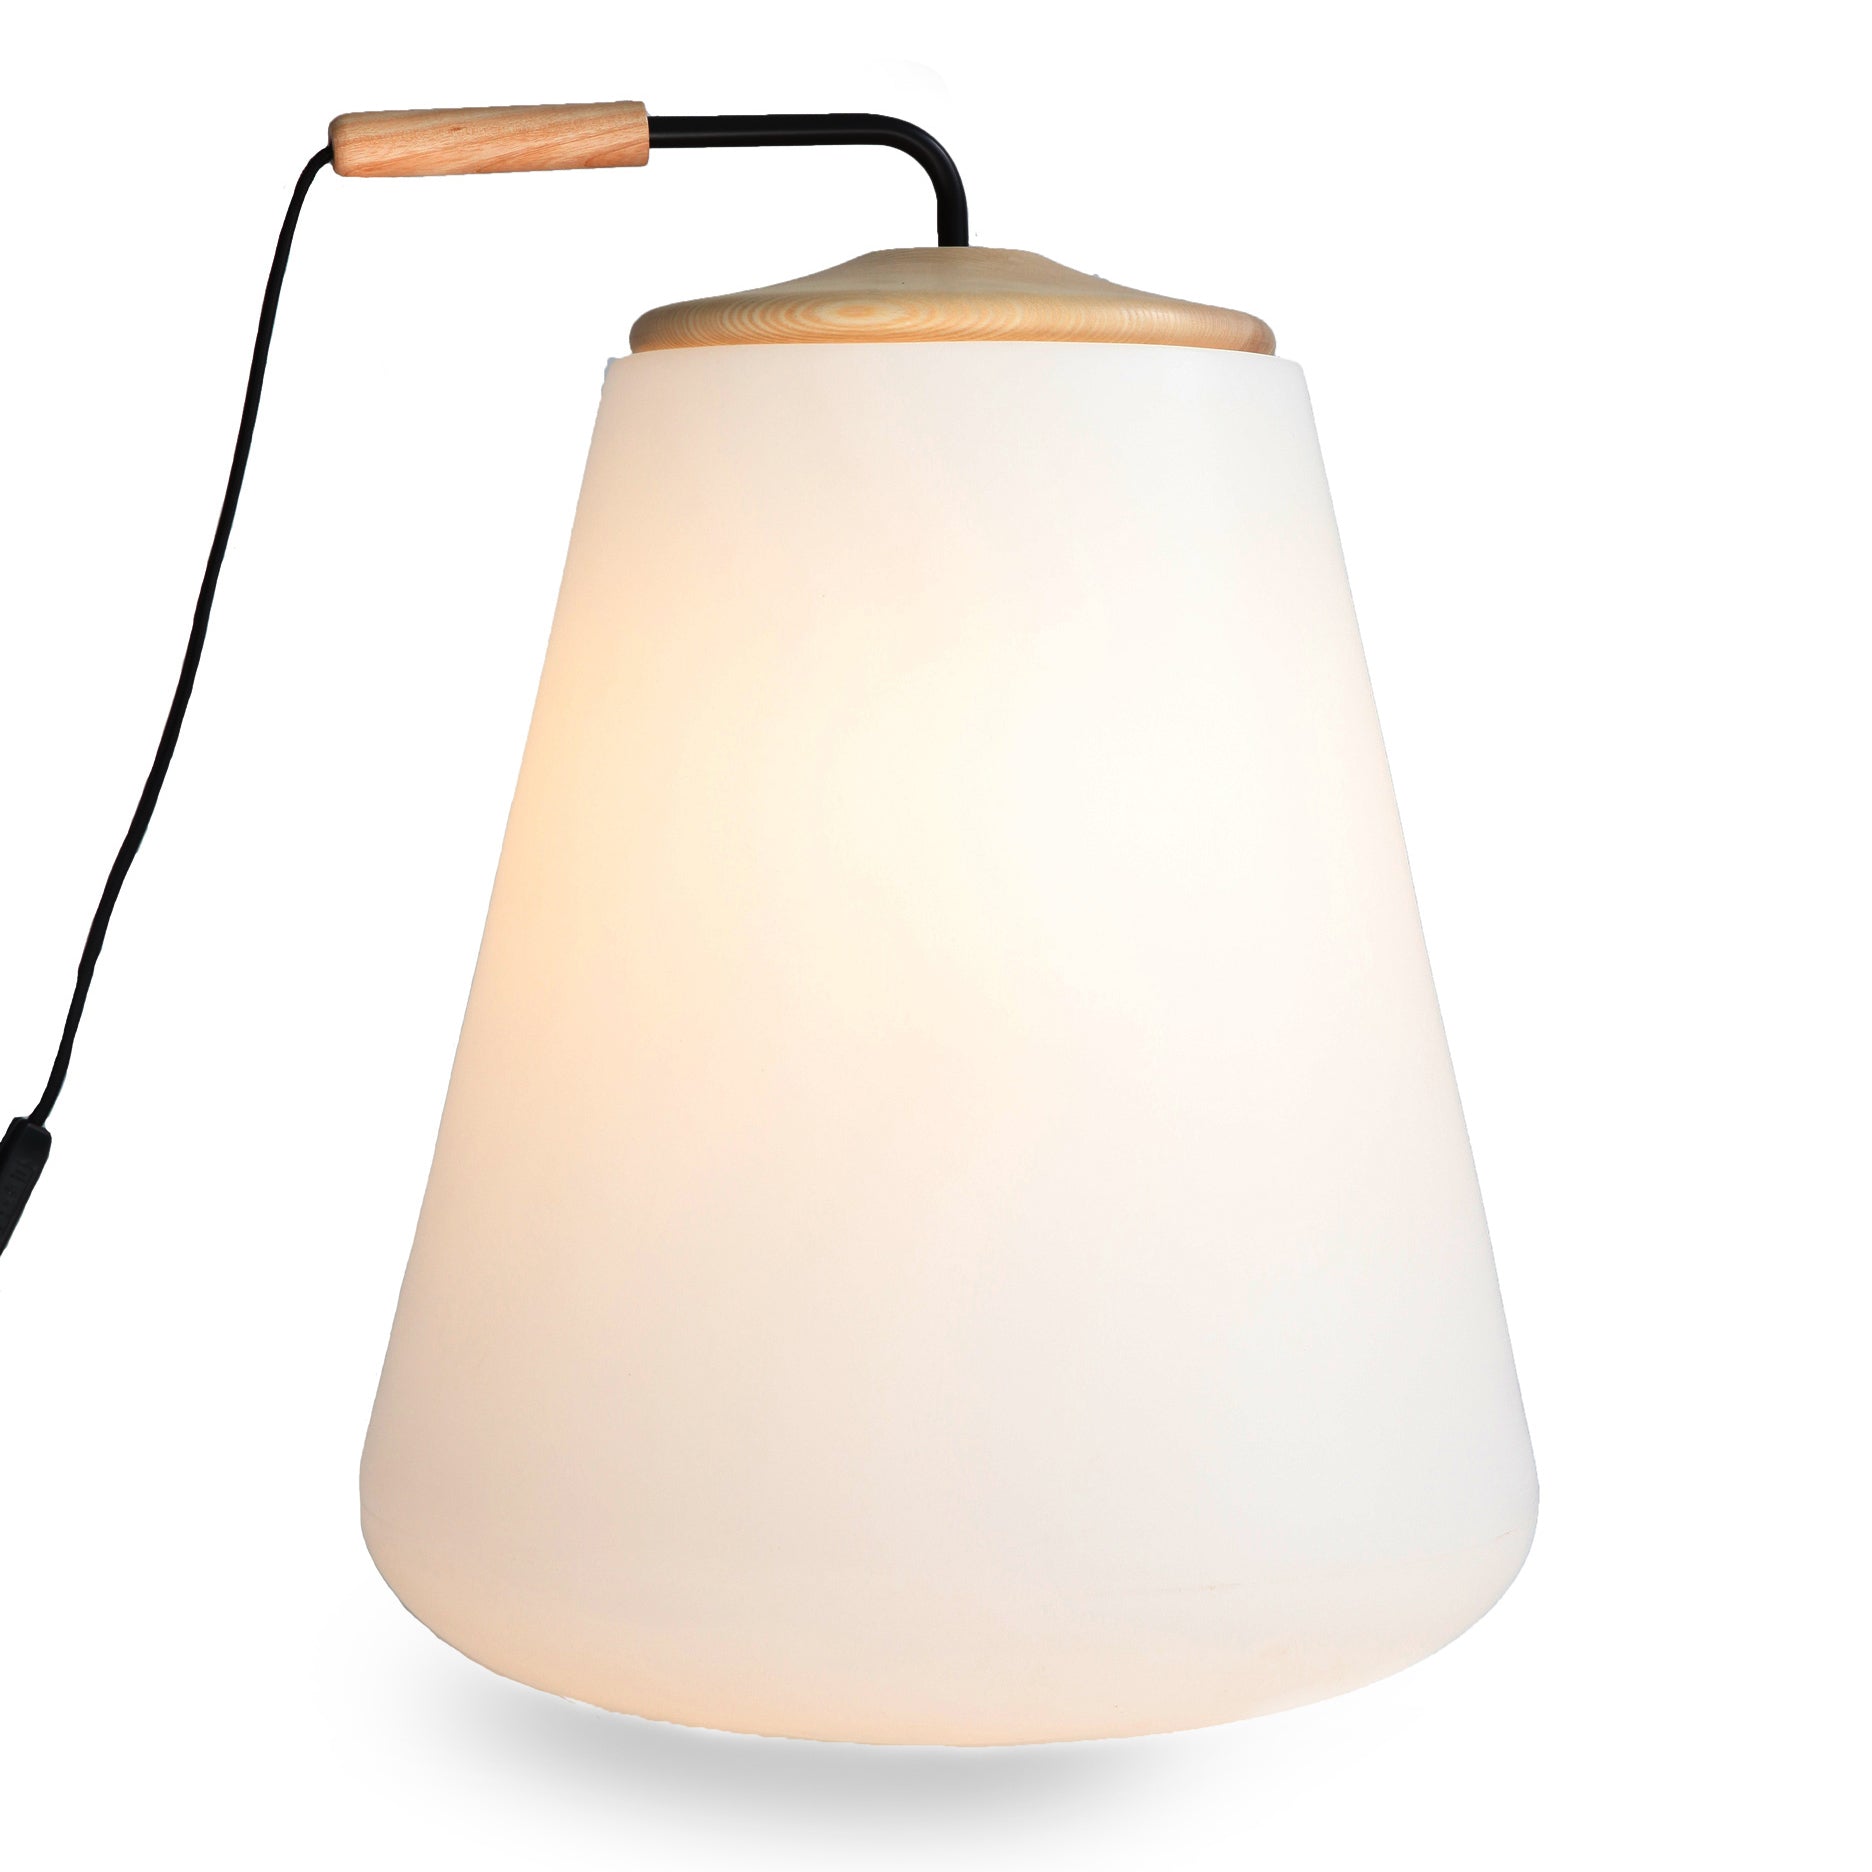 FIREFLY - Lampe Outdoor à Poser Filaire 5M